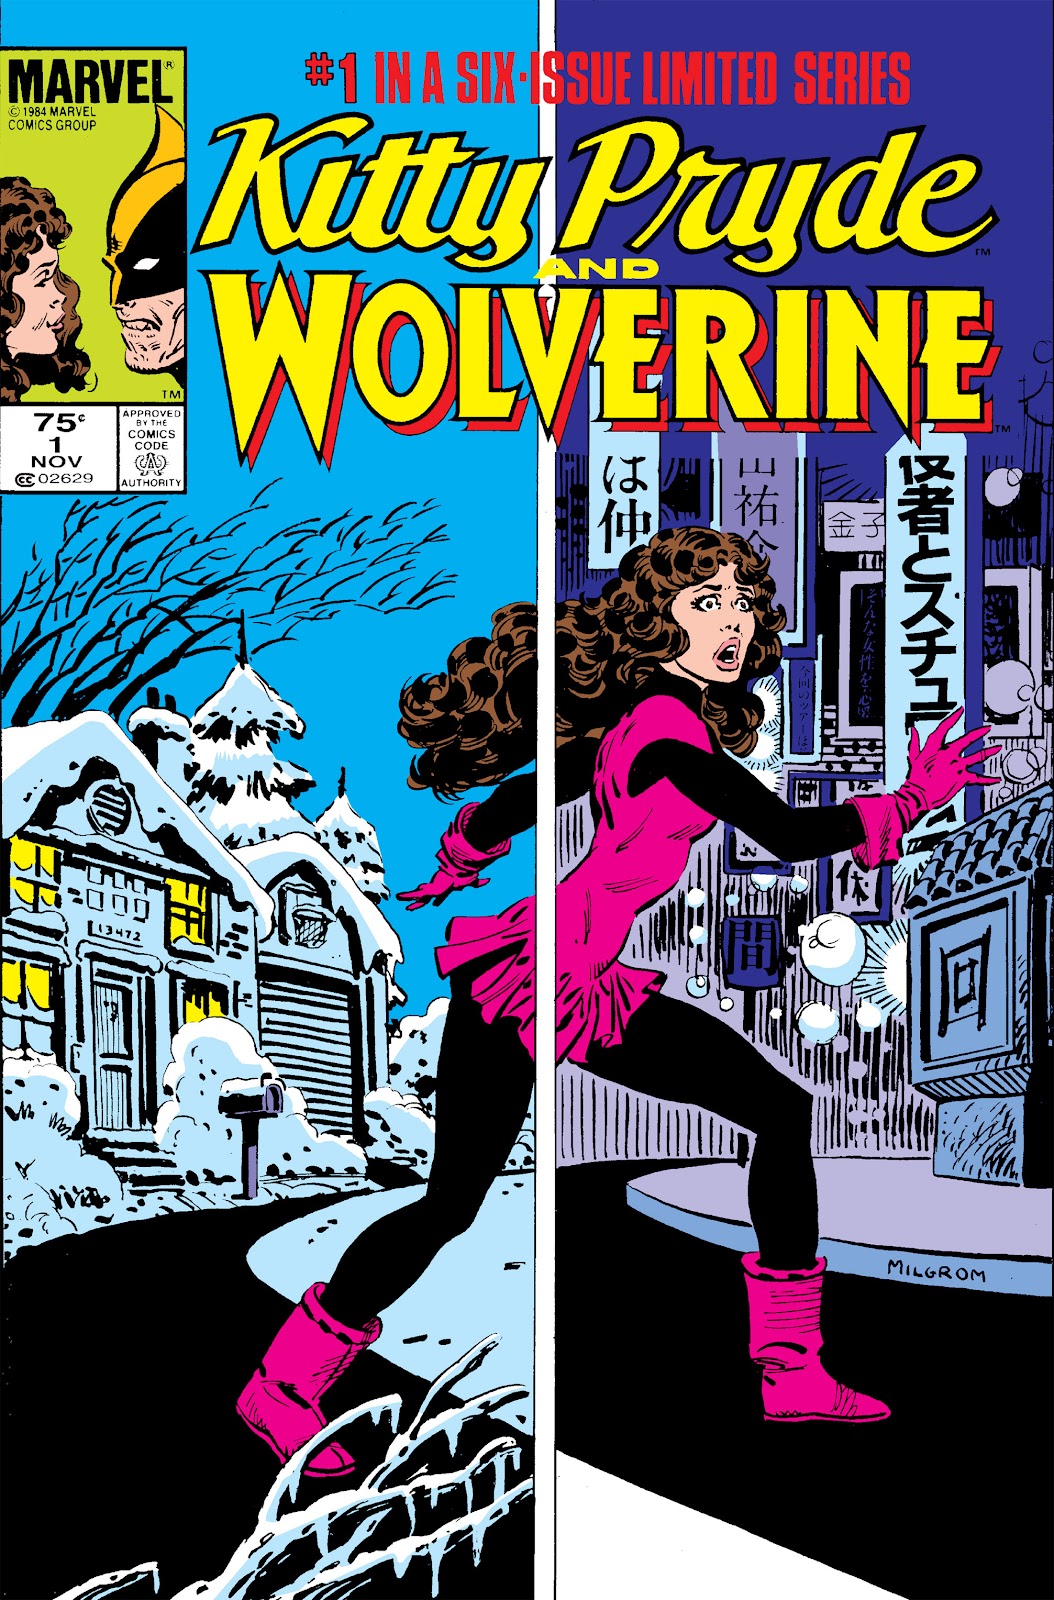 Kitty Pryde Shemale Porn - Kitty Pryde And Wolverine 1 | Read Kitty Pryde And Wolverine 1 comic online  in high quality. Read Full Comic online for free - Read comics online in  high quality .| One million comics .Com